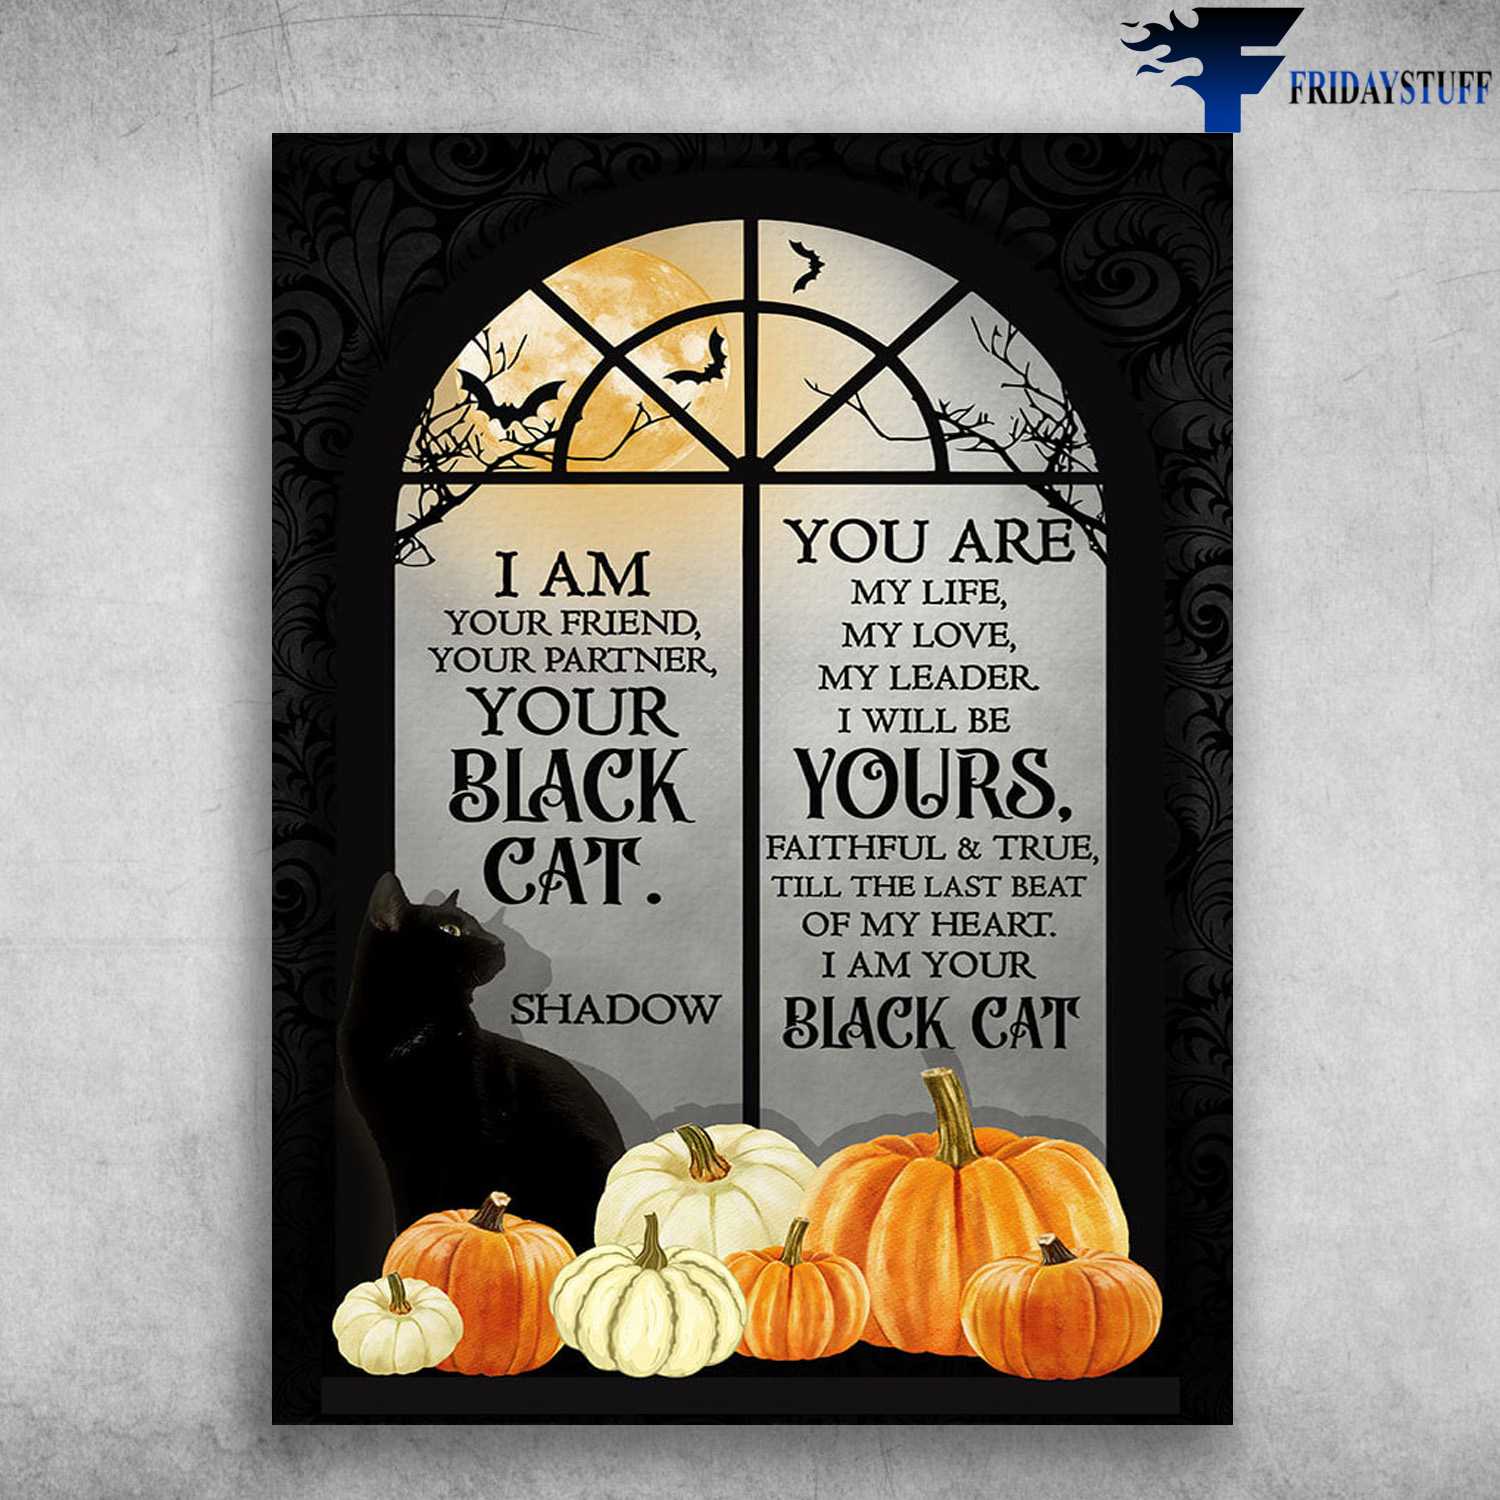 Black Cat Pumpkin, Window Poster, Halloween Day - I Am Your Friend, Your Black Cat, Shadow, You Are My Life, My Love, My Leader